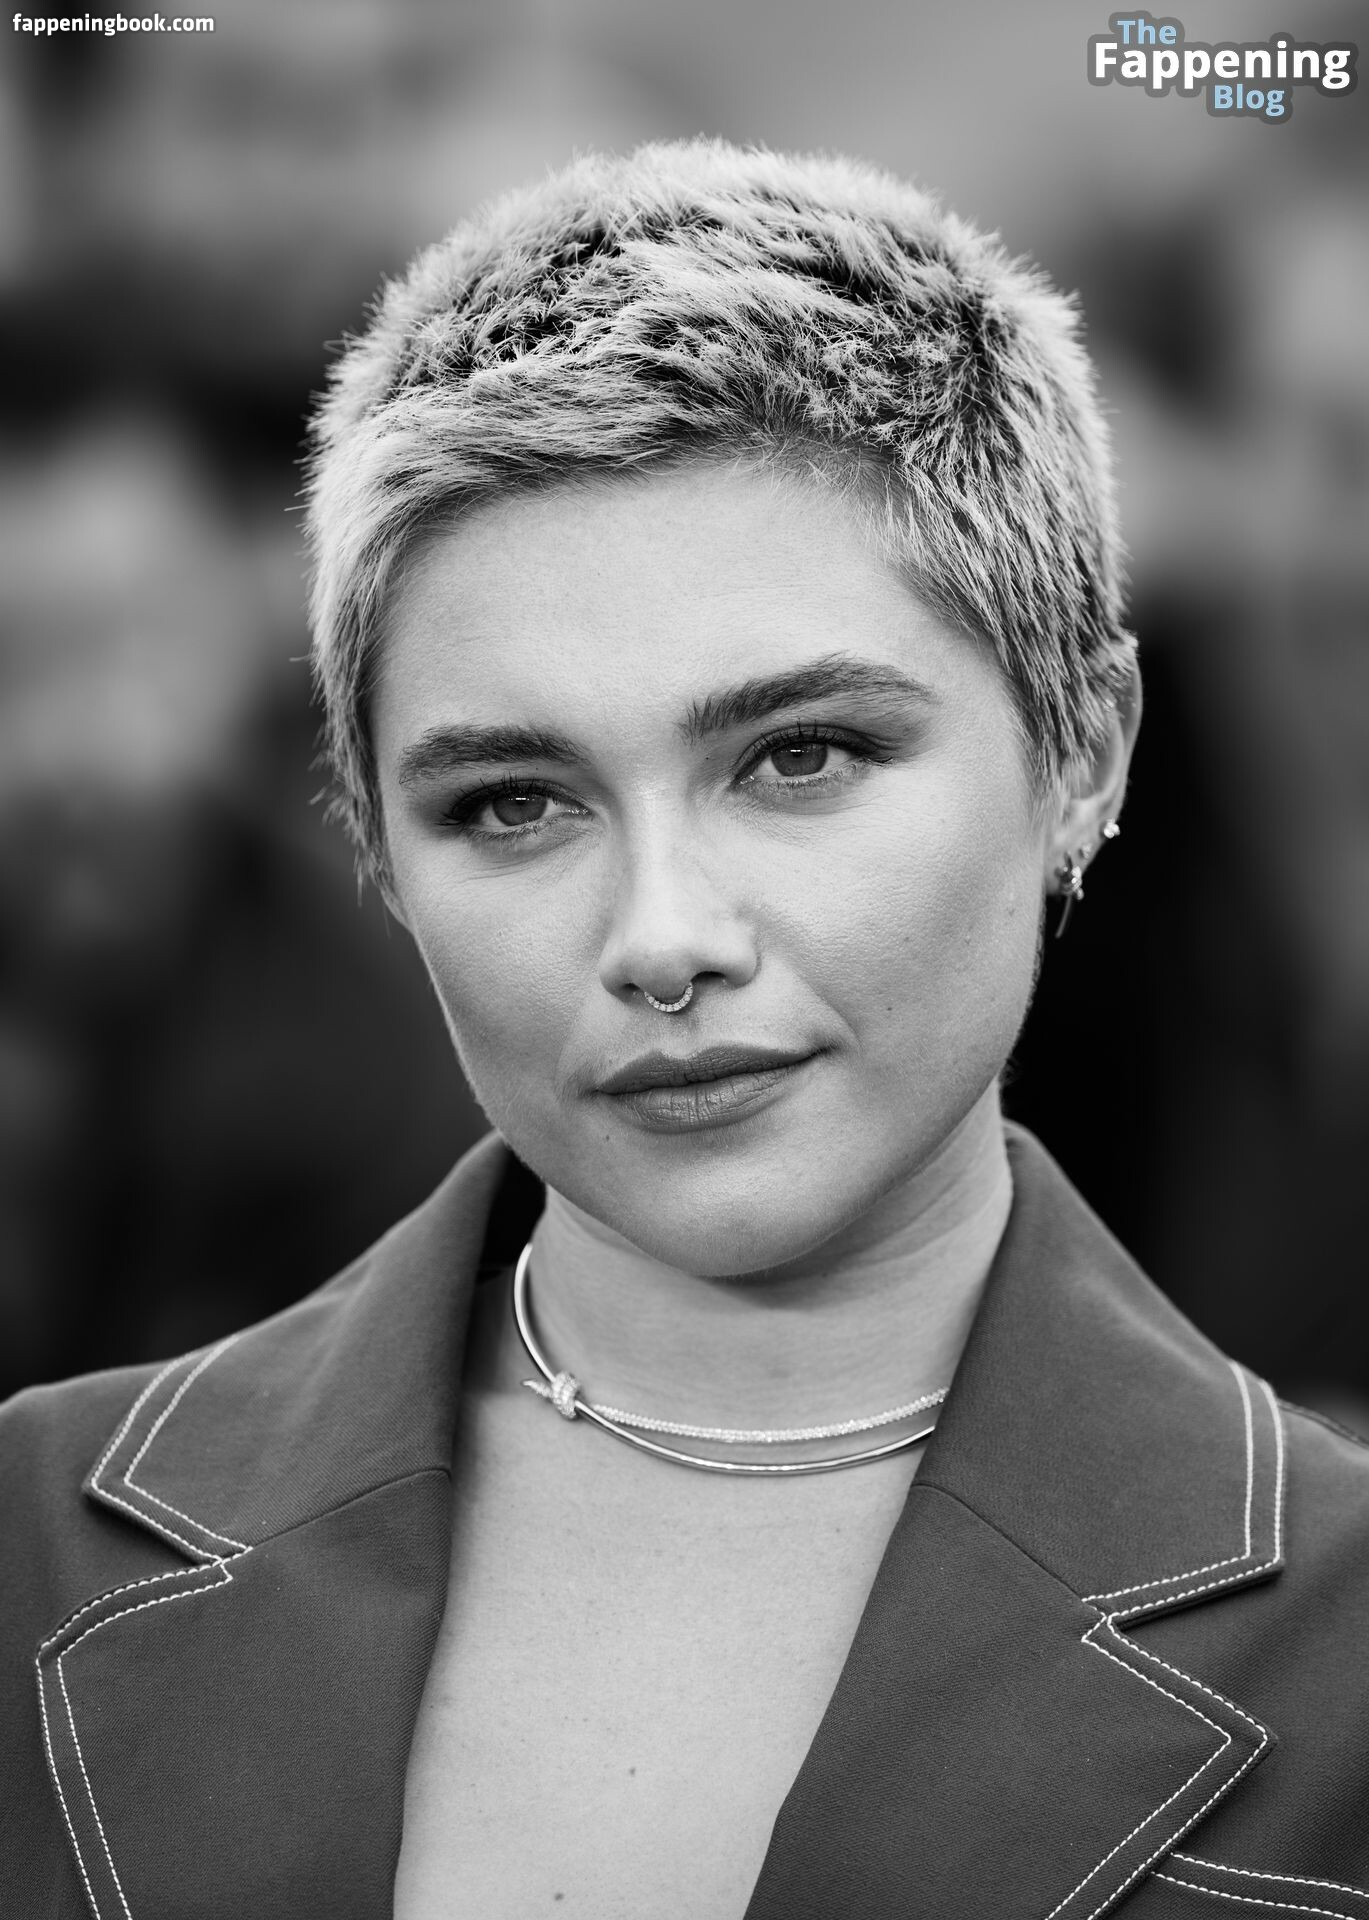 Florence Pugh Nude, The Fappening - Photo #5643816 - FappeningBook